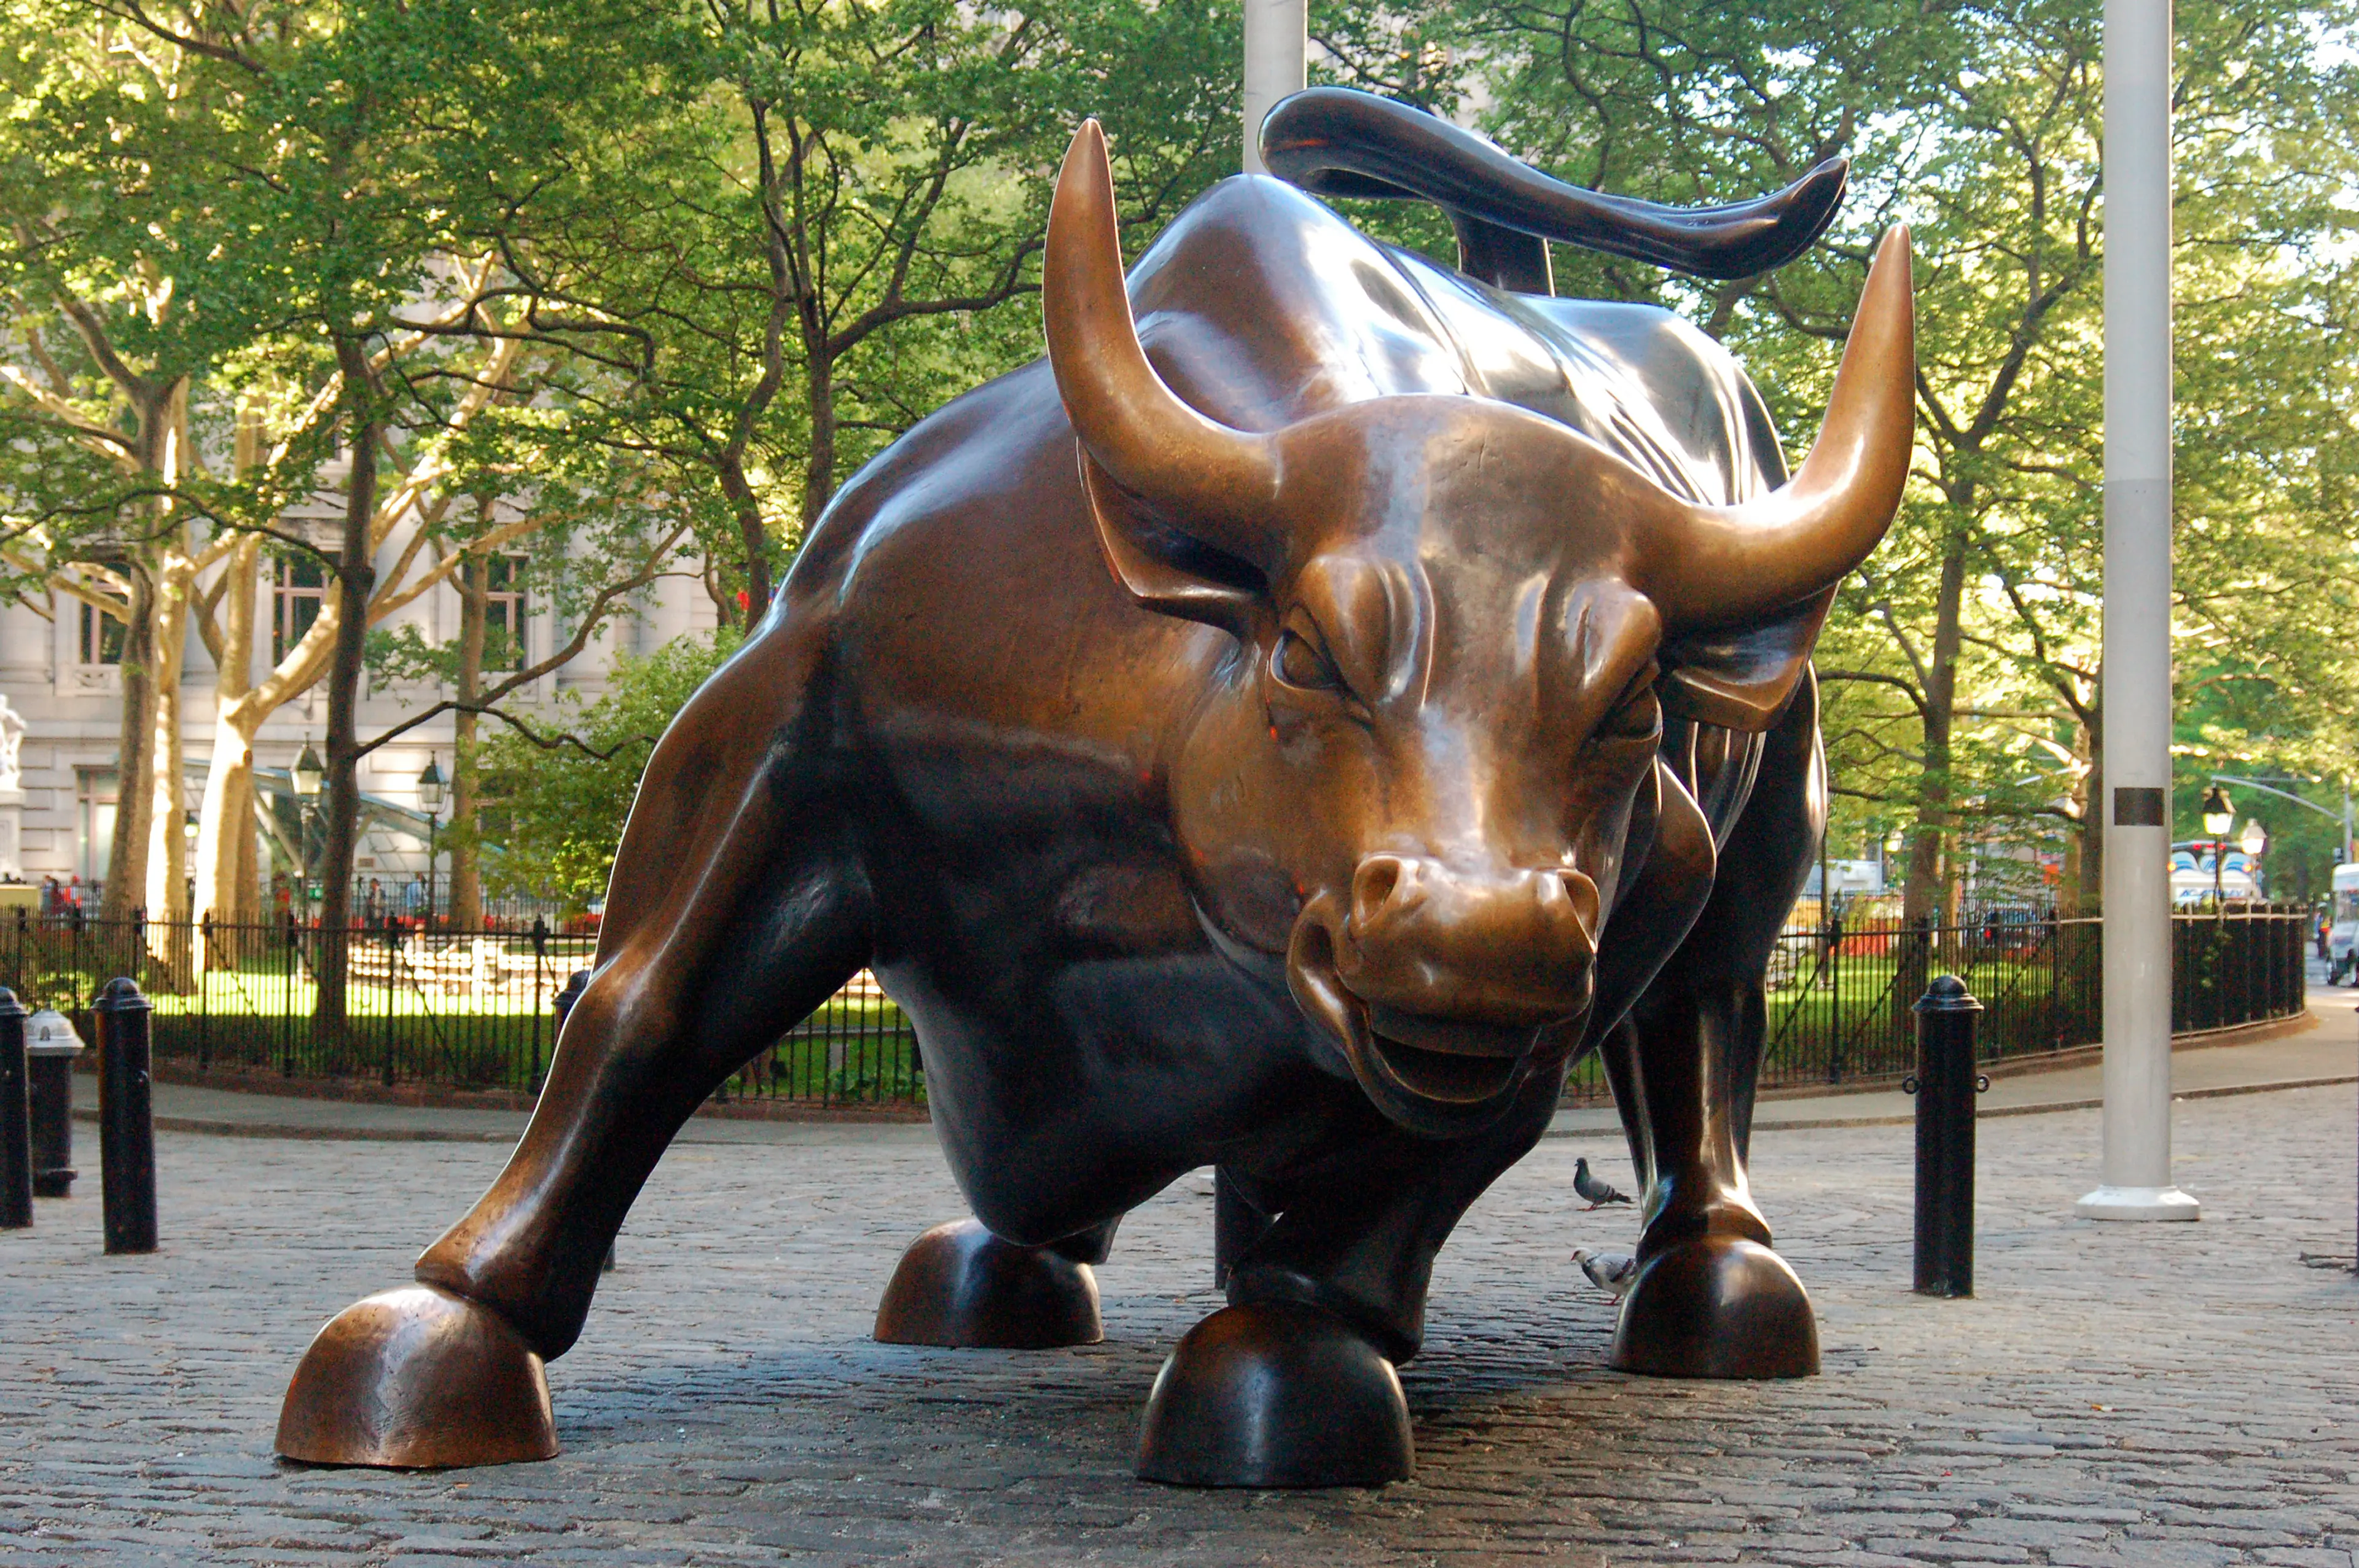 The charging bull sculpture of Wall Street